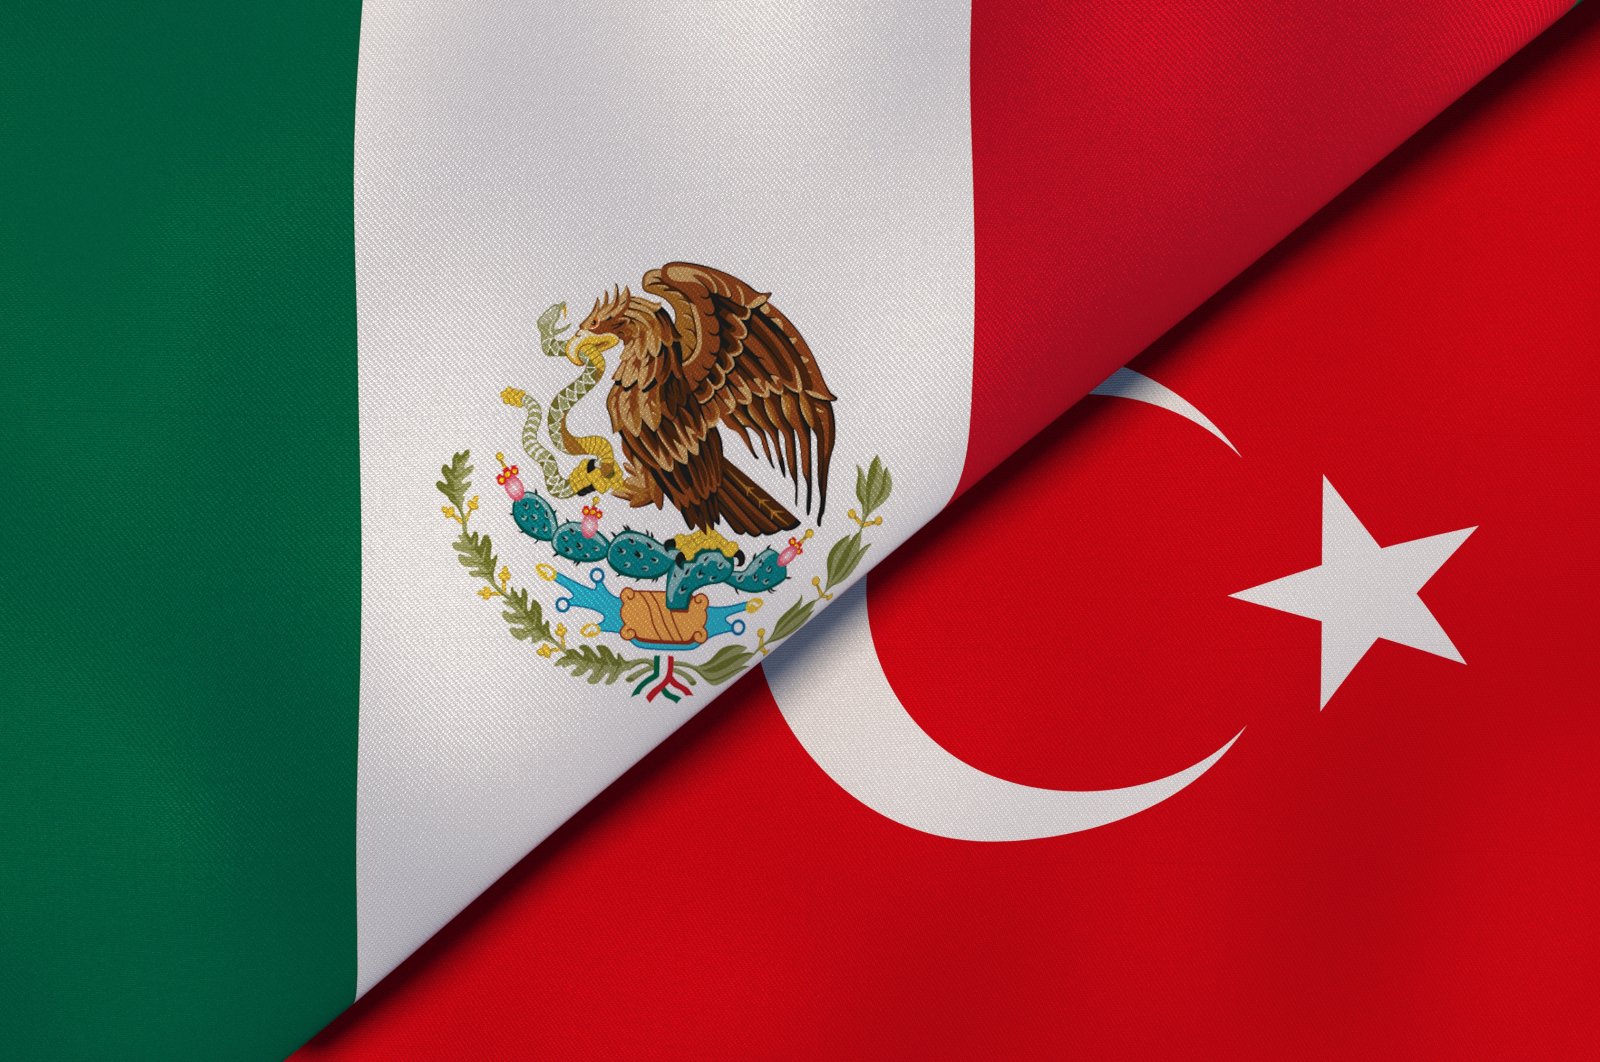 The flags of Mexico and Turkey. (Shutterstock)